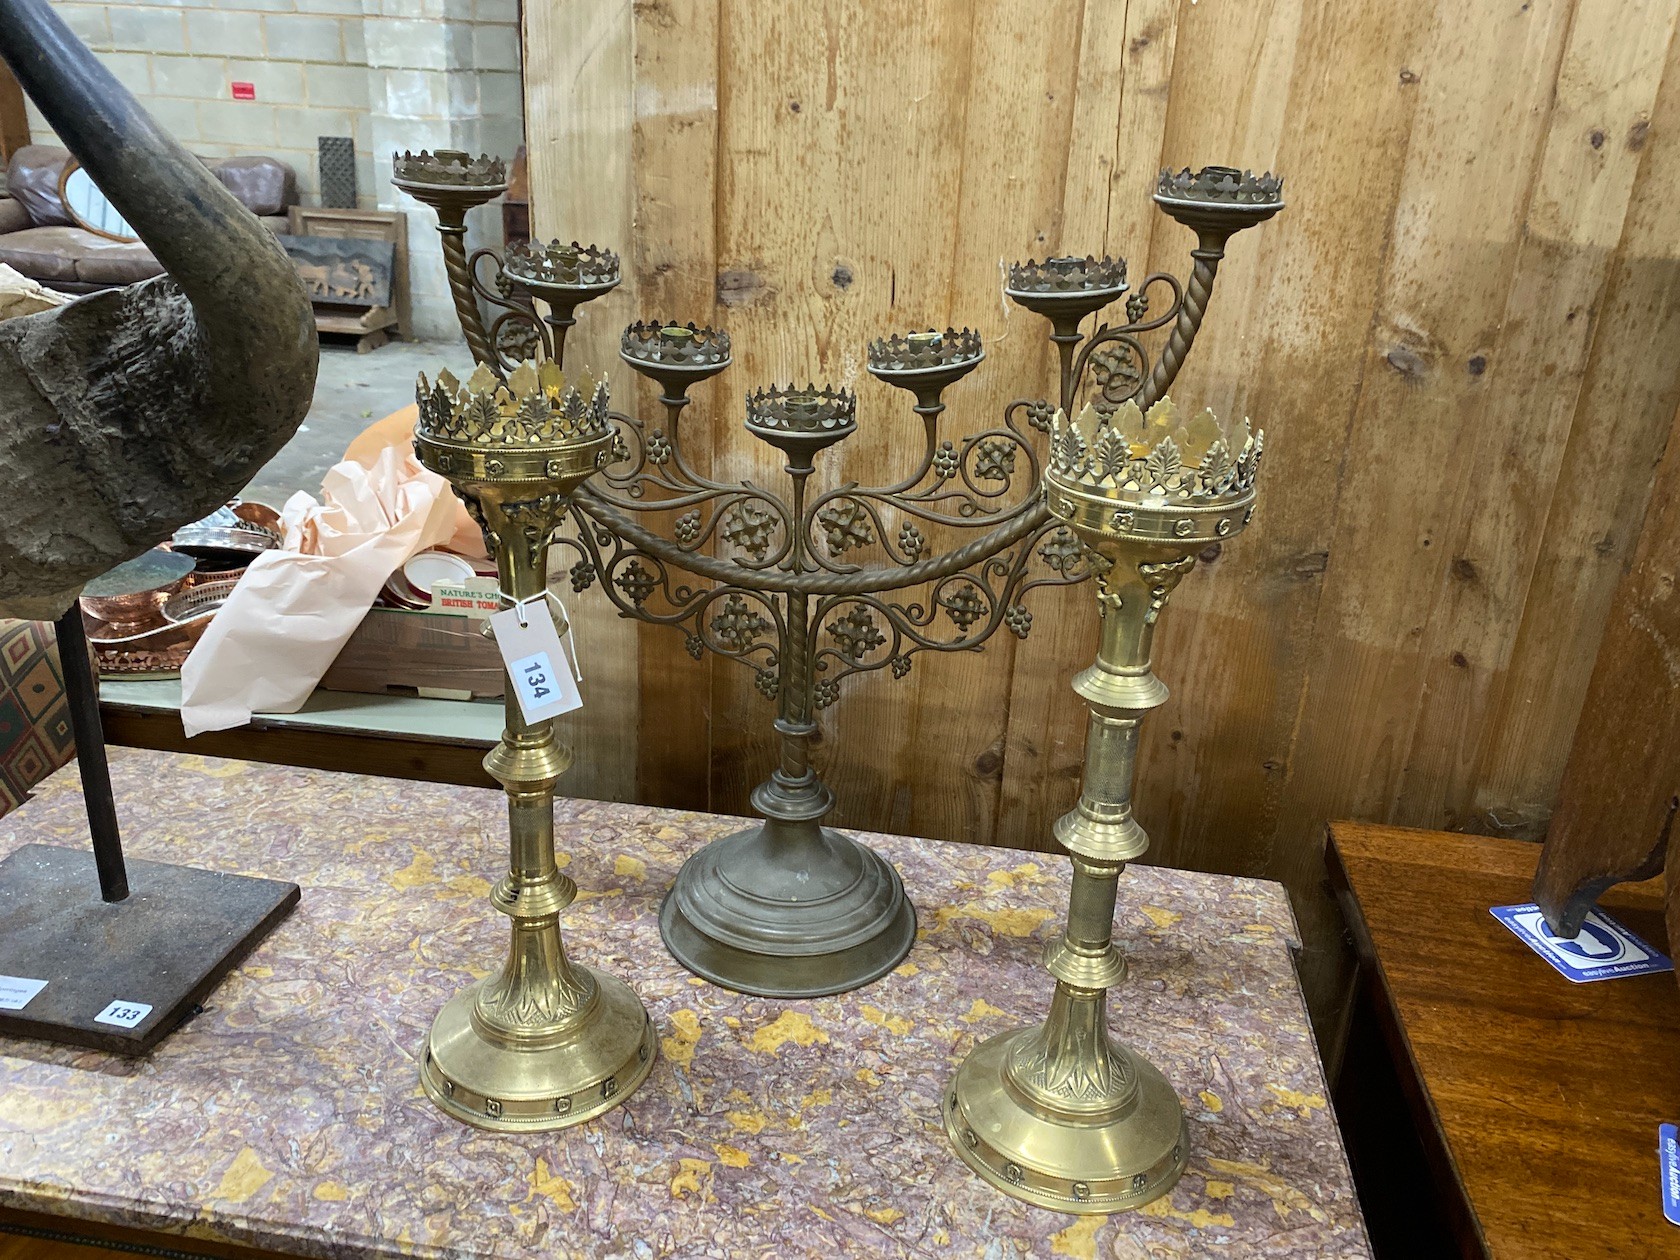 Two brass Gothic style pricket candlesticks, largest height 62cm and a brass Menorah candlestand                                                                                                                            